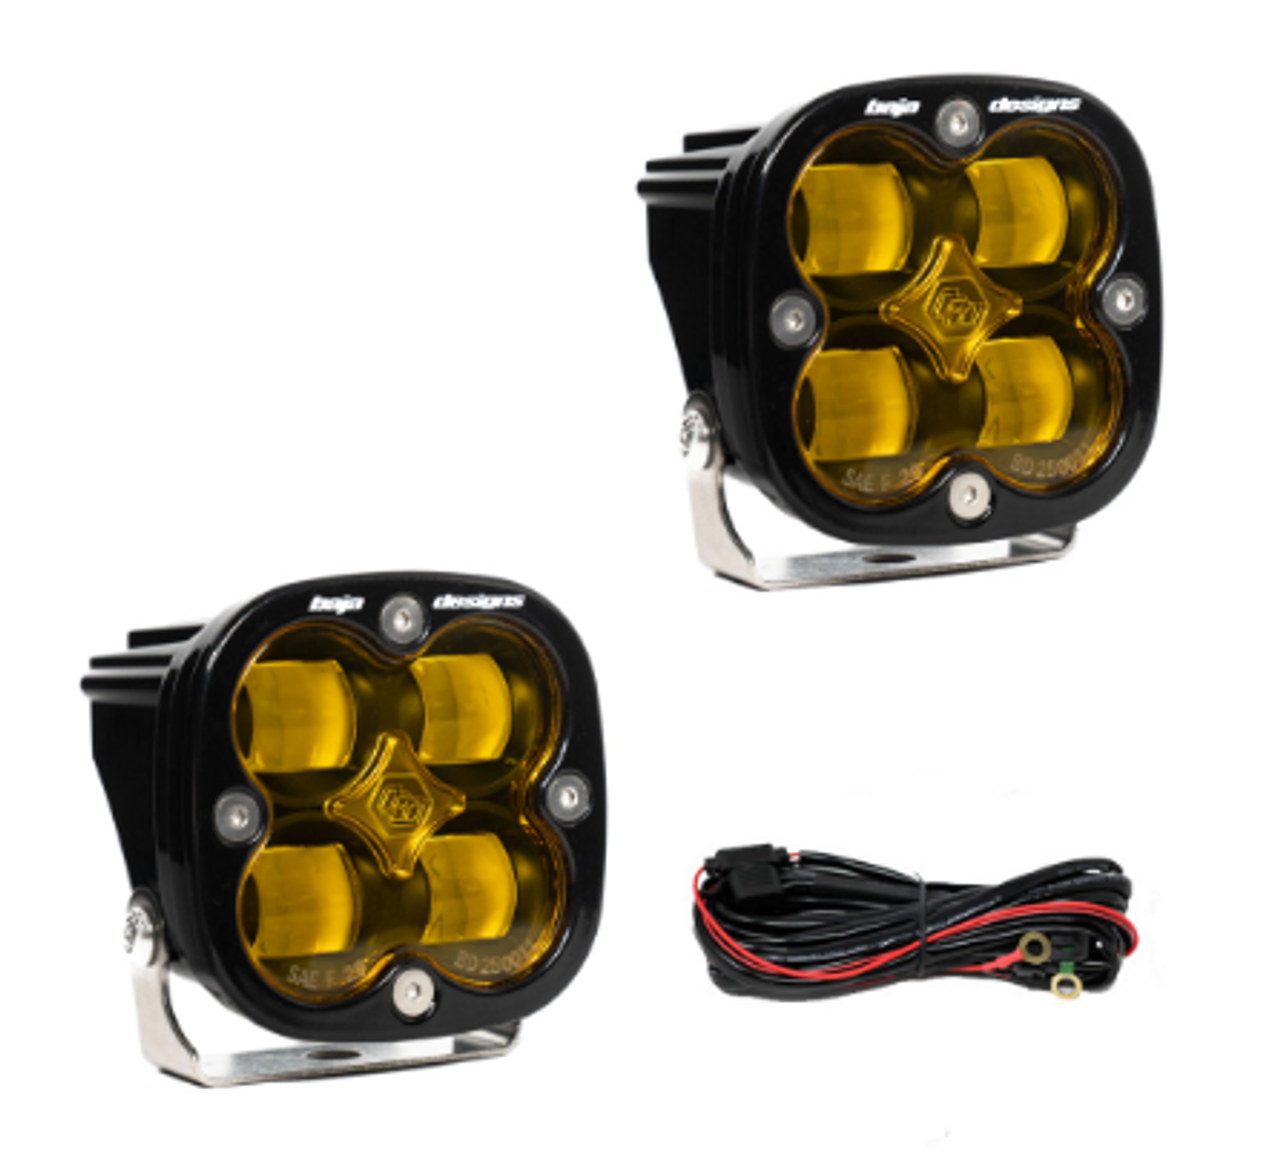 Baja Designs 257811 Squadron SAE LED Auxiliary Light Pod Pair in Amber